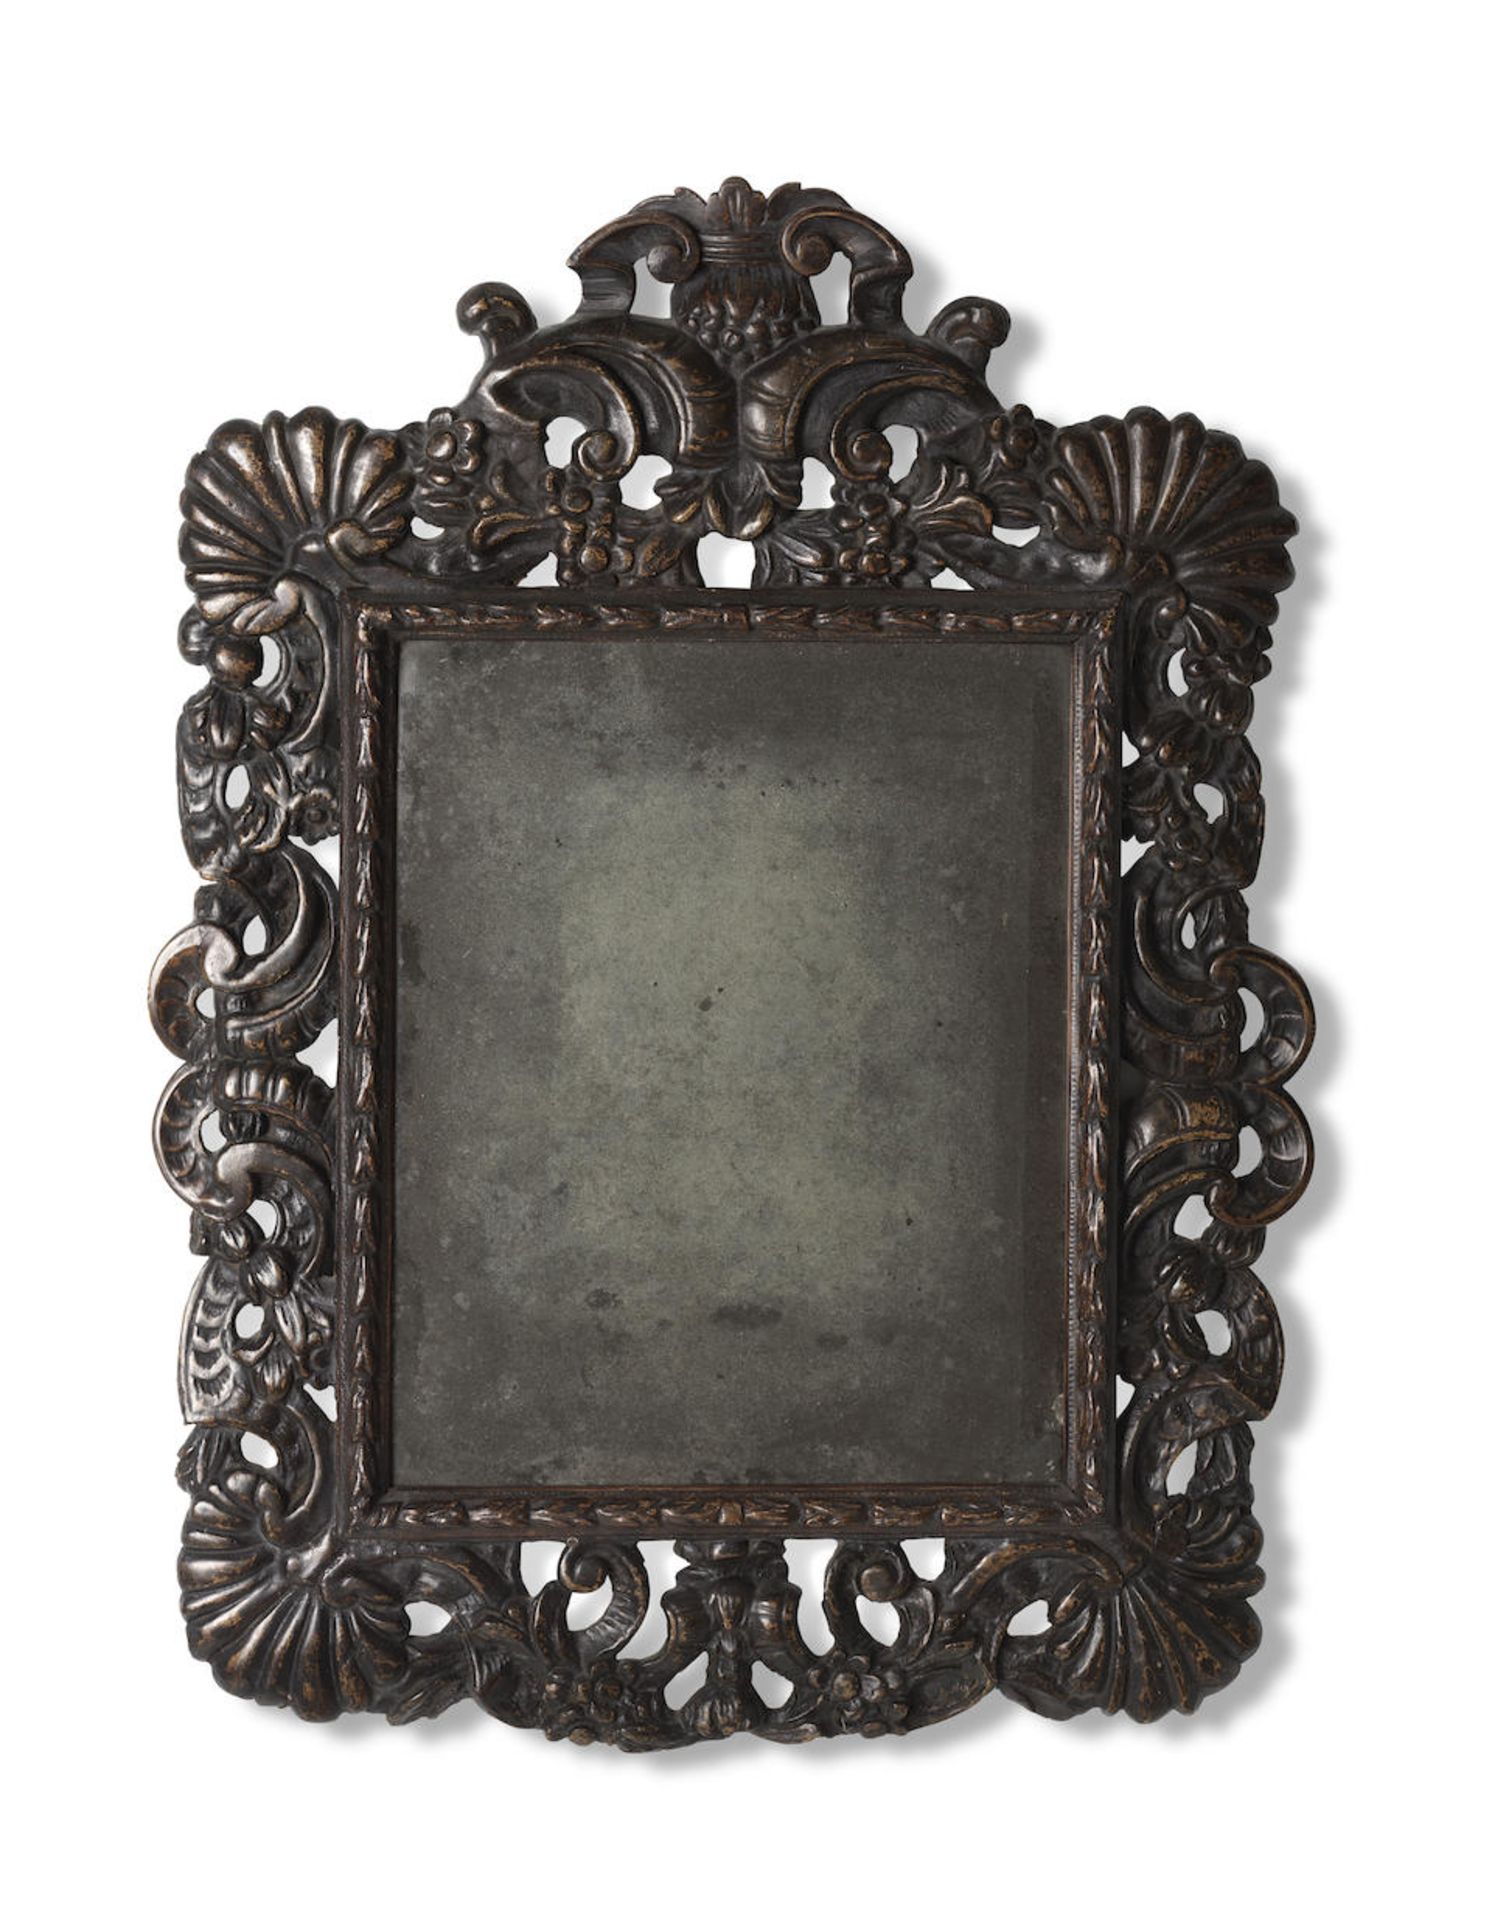 A Charles II mirror or picture frame 1660-1685, but has apparently undergone extensive restorati...